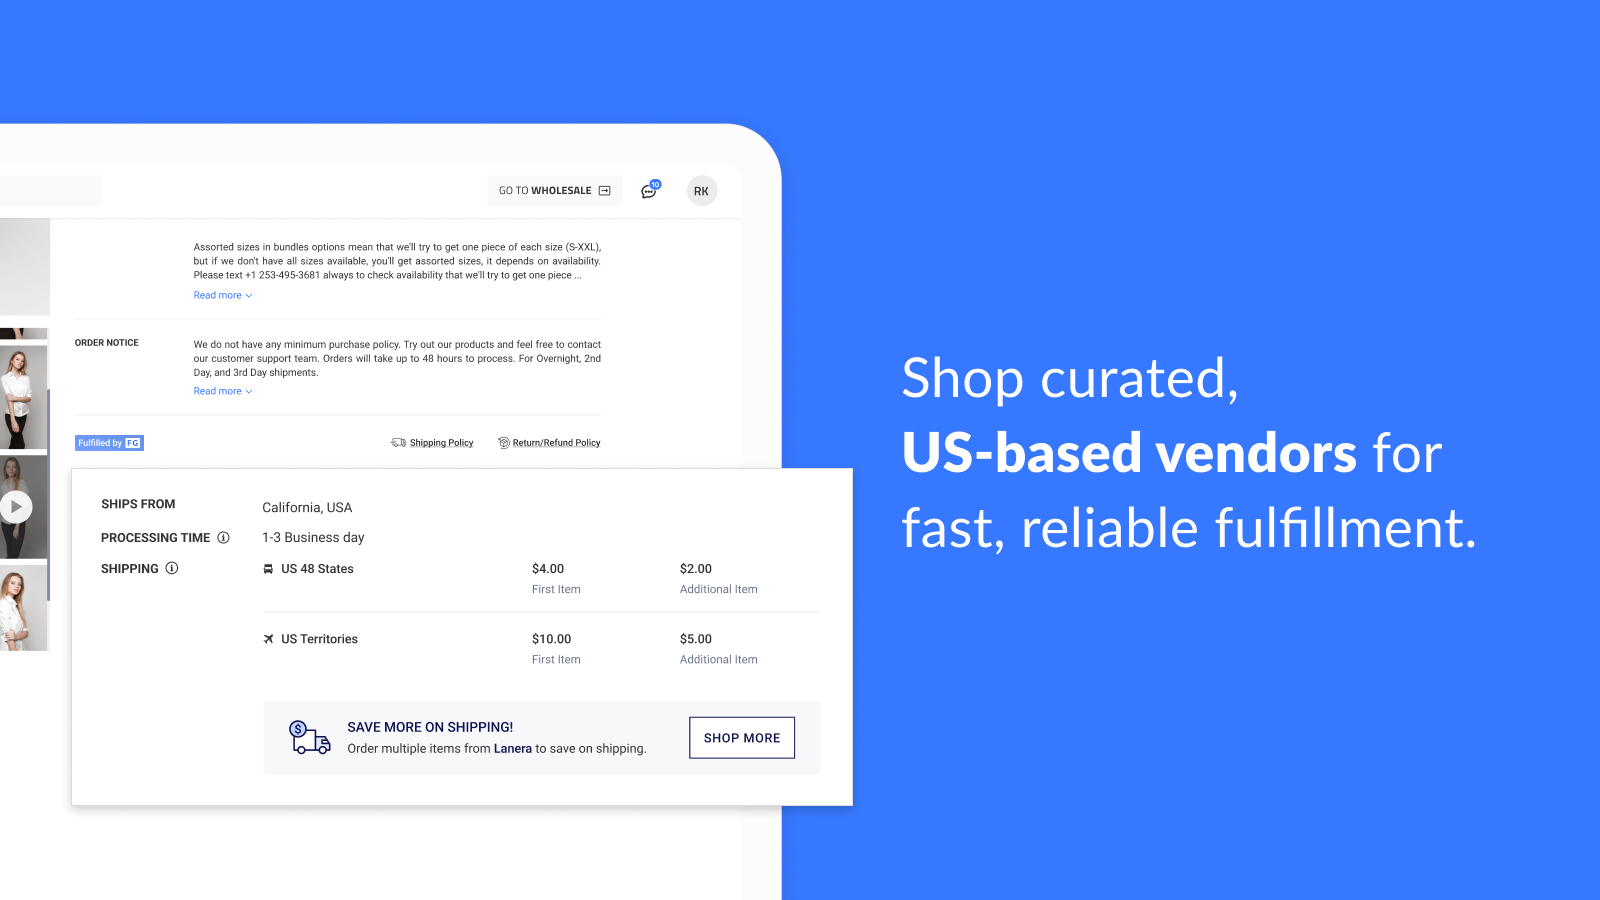 Shop curated, US-based vendors for fast, reliable fulfillment.